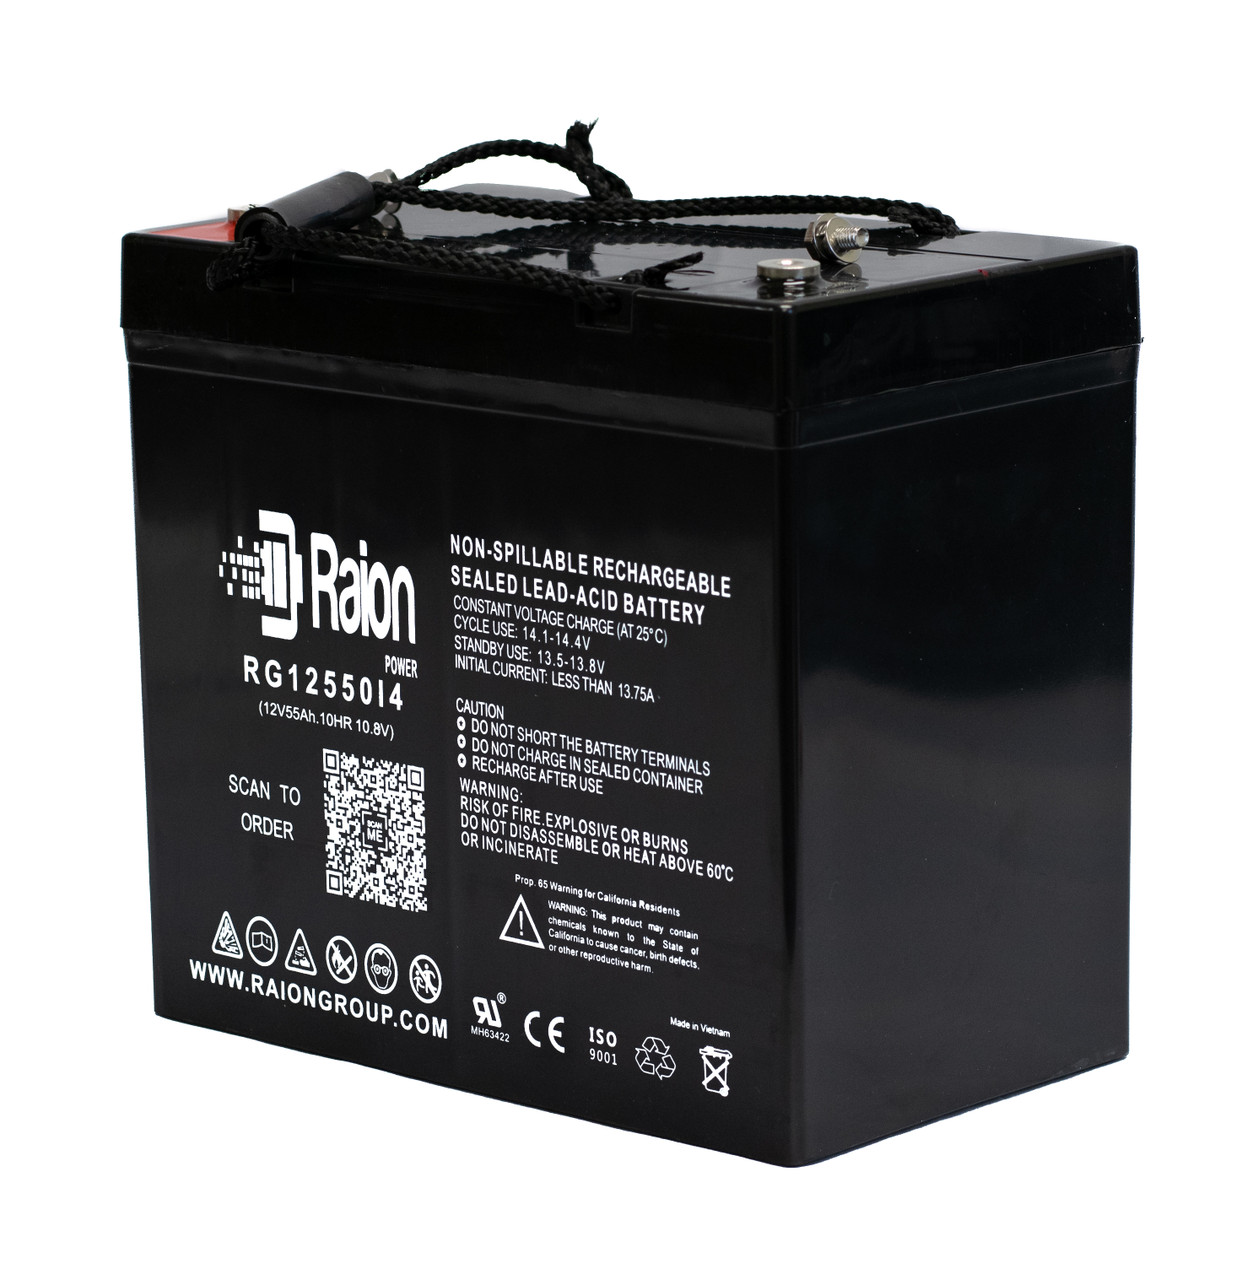 Raion Power Replacement 12V 55Ah Battery for XYC DC55-12 - 1 Pack